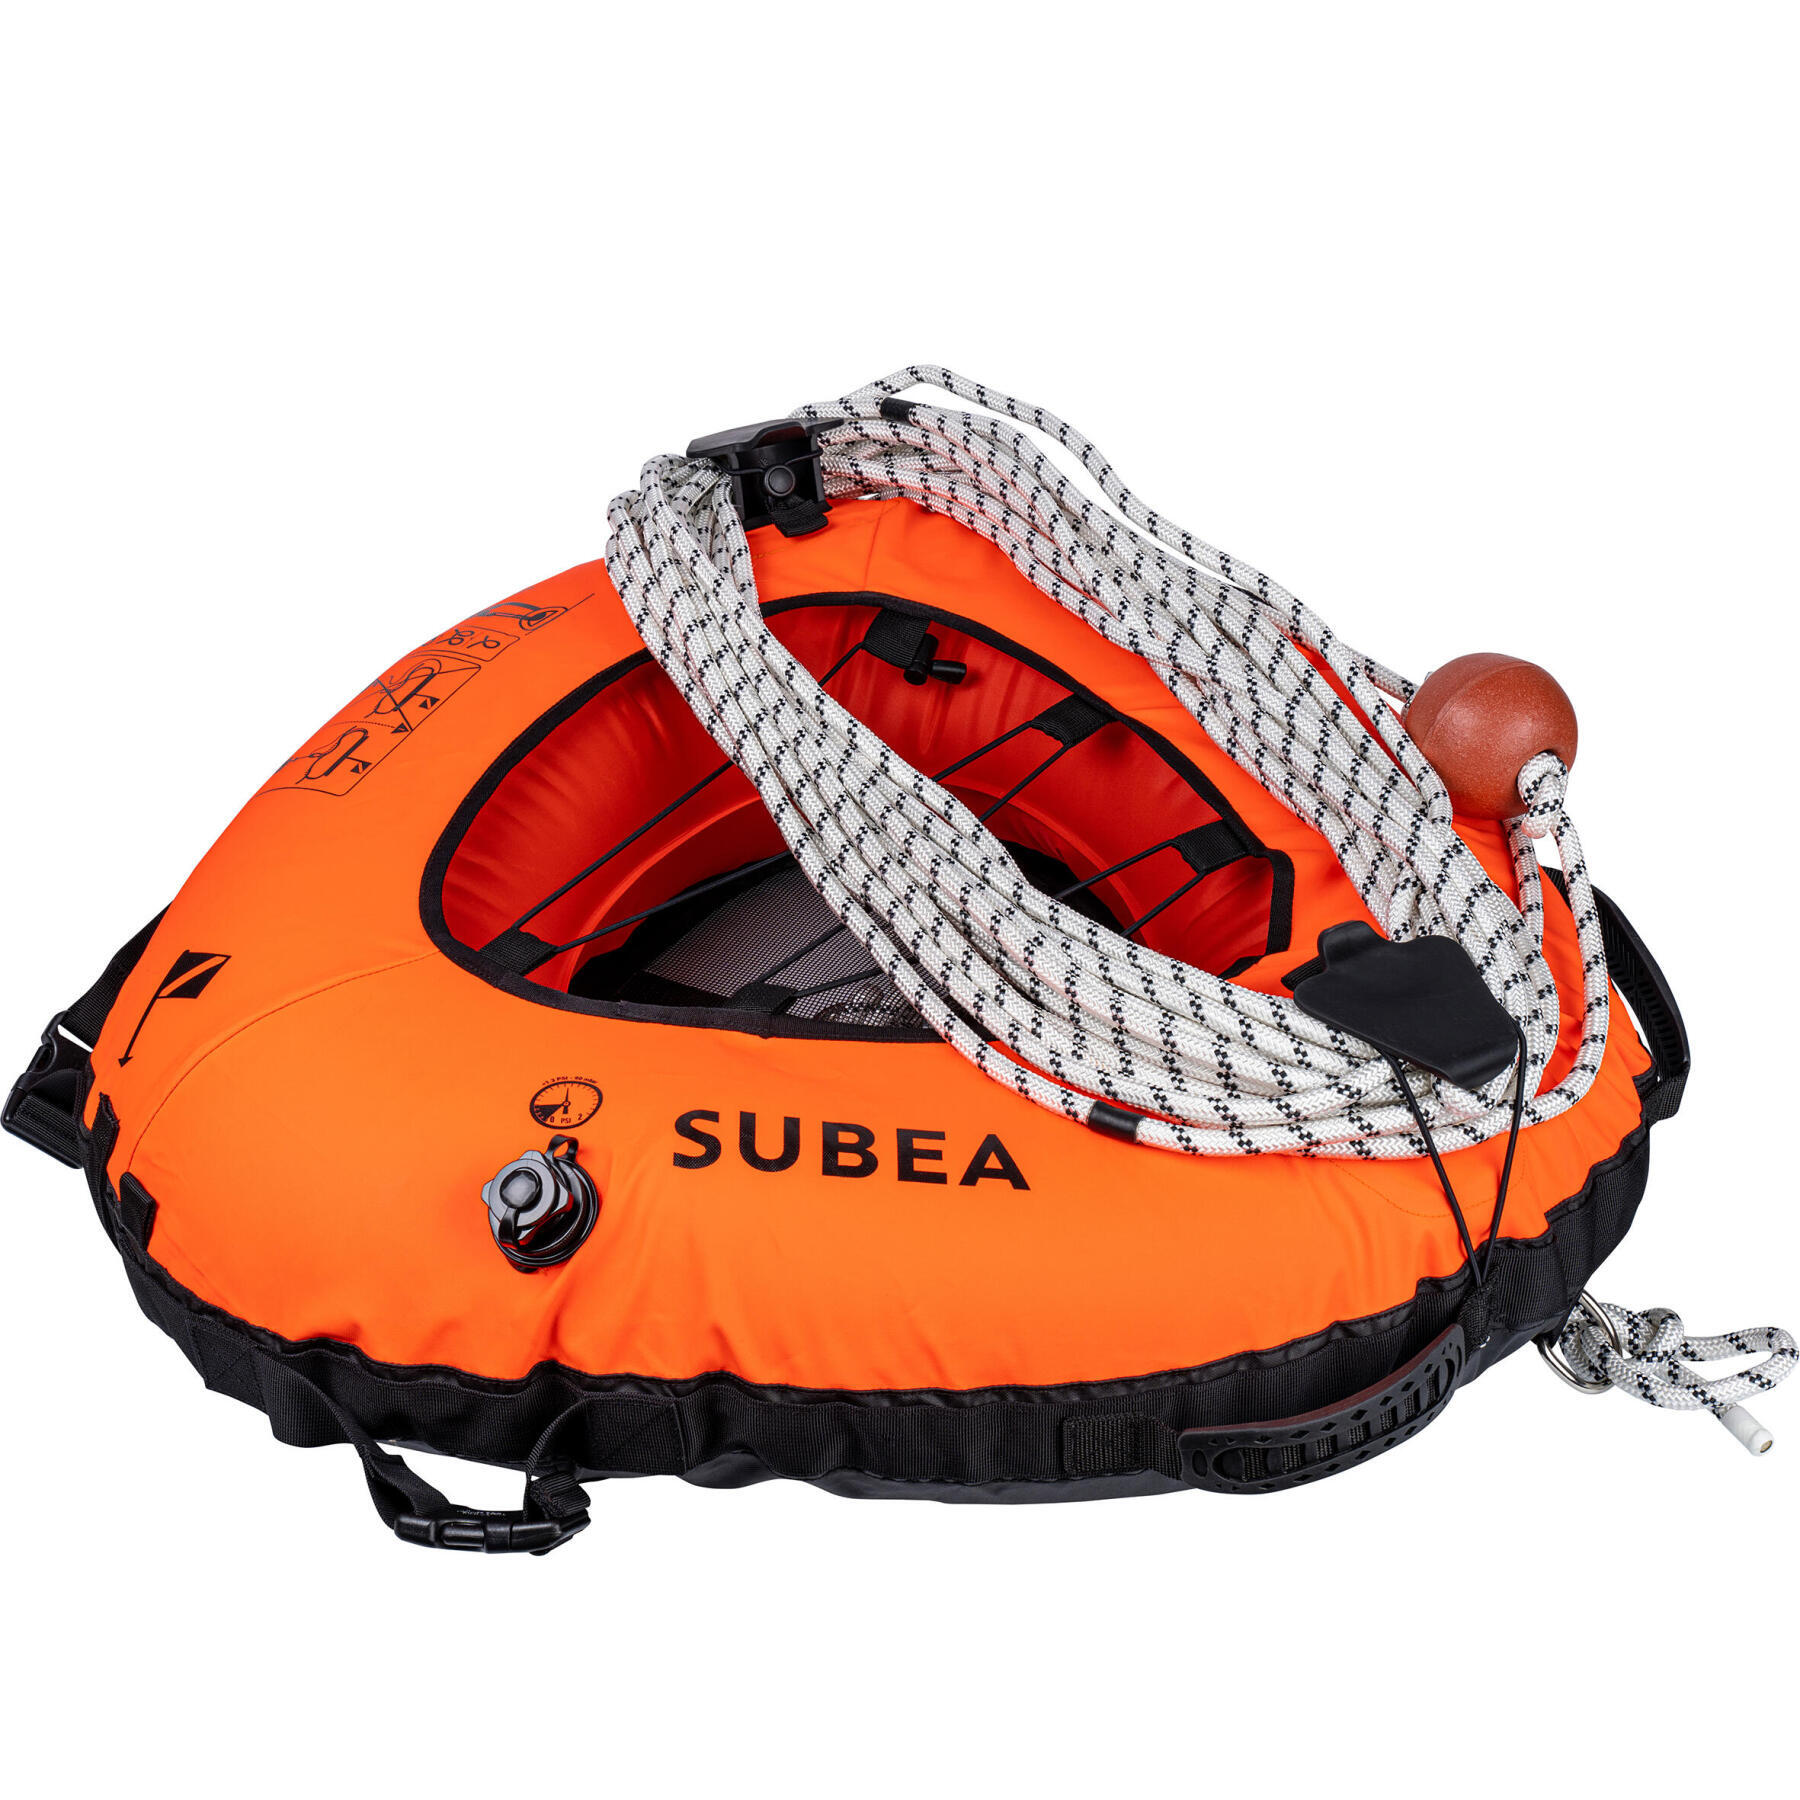 How to repair your freediving safety buoy.